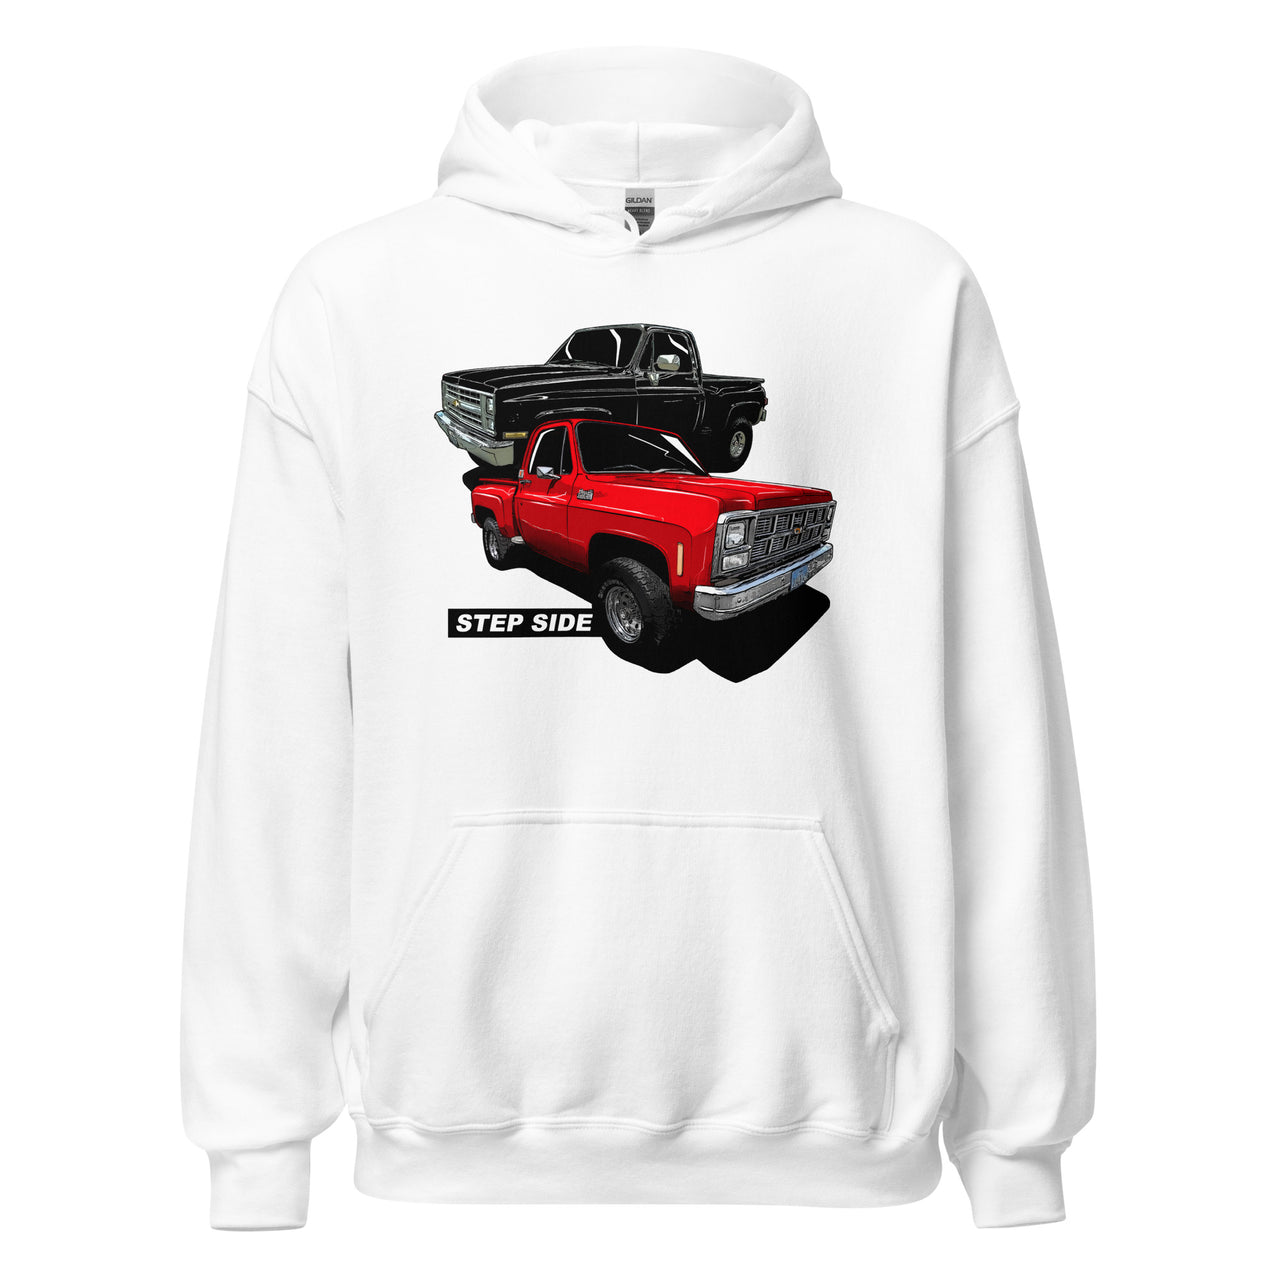 step side square body truck hoodie in white